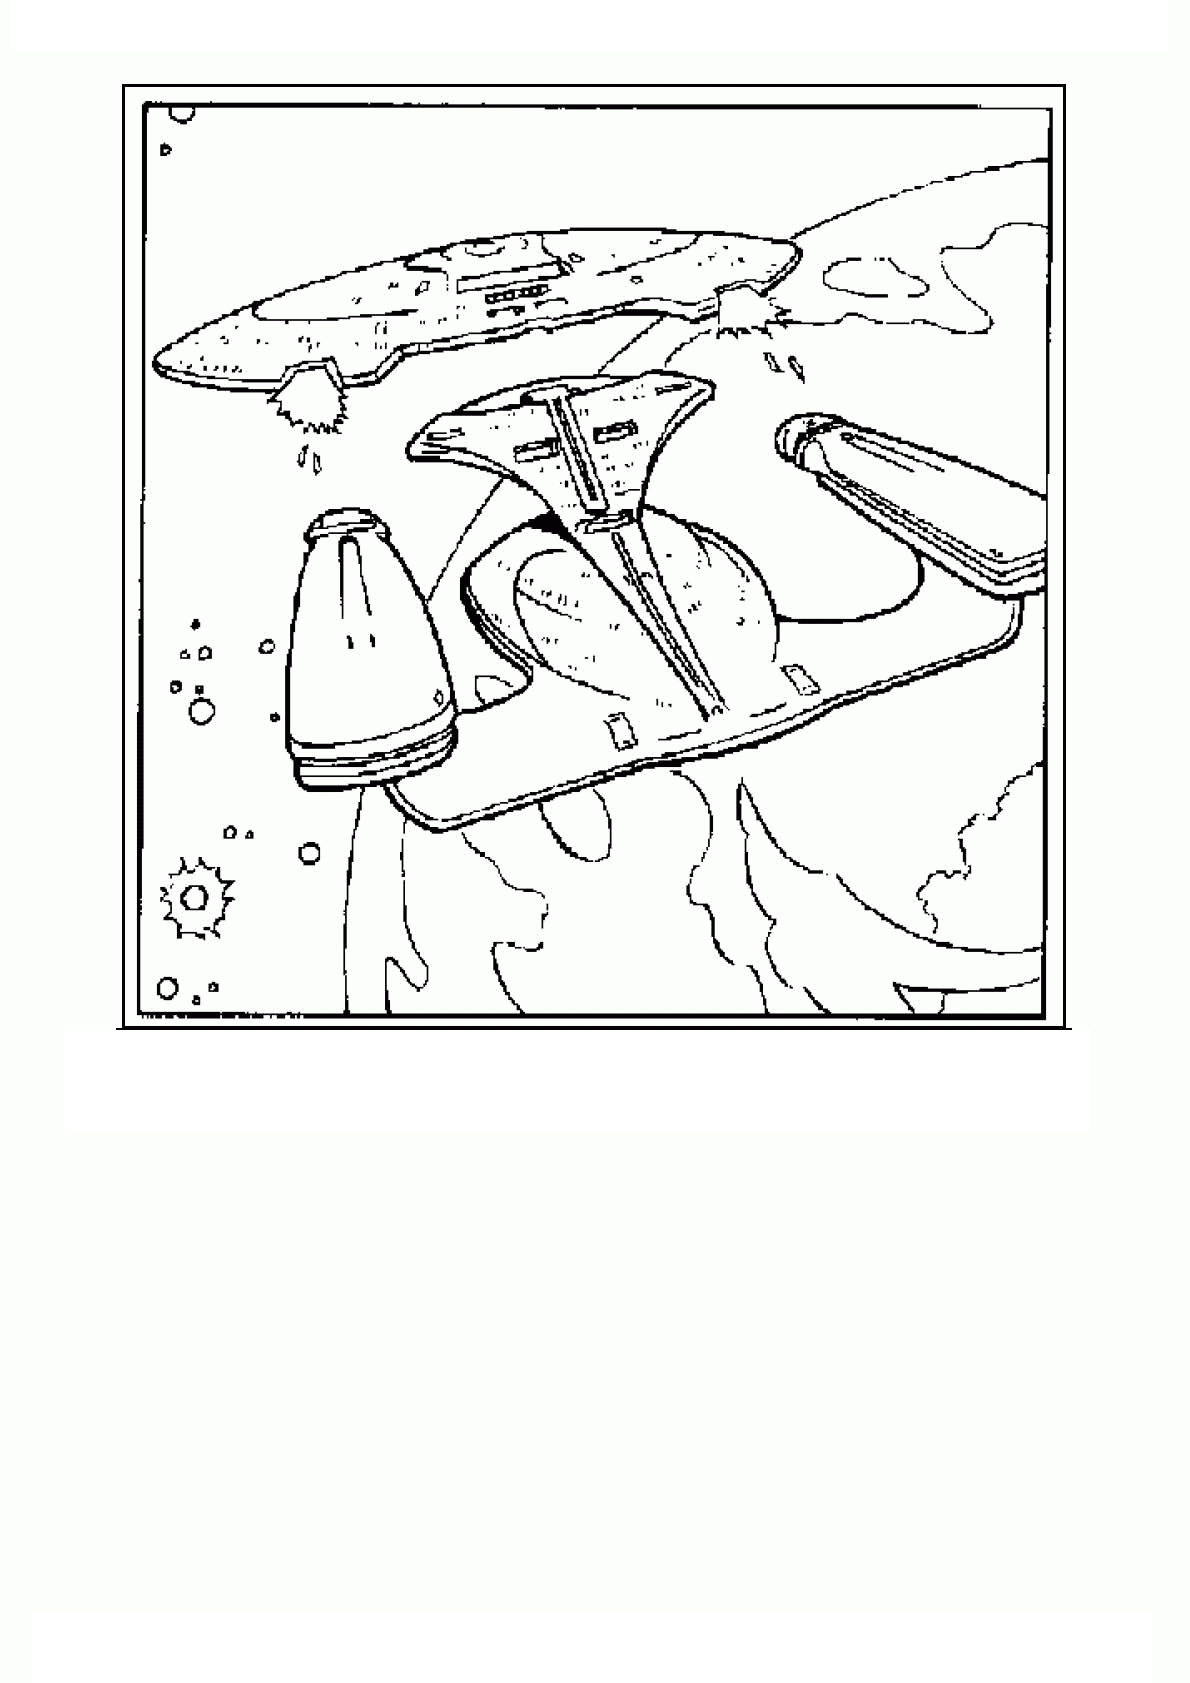 Star trek Coloring Pages